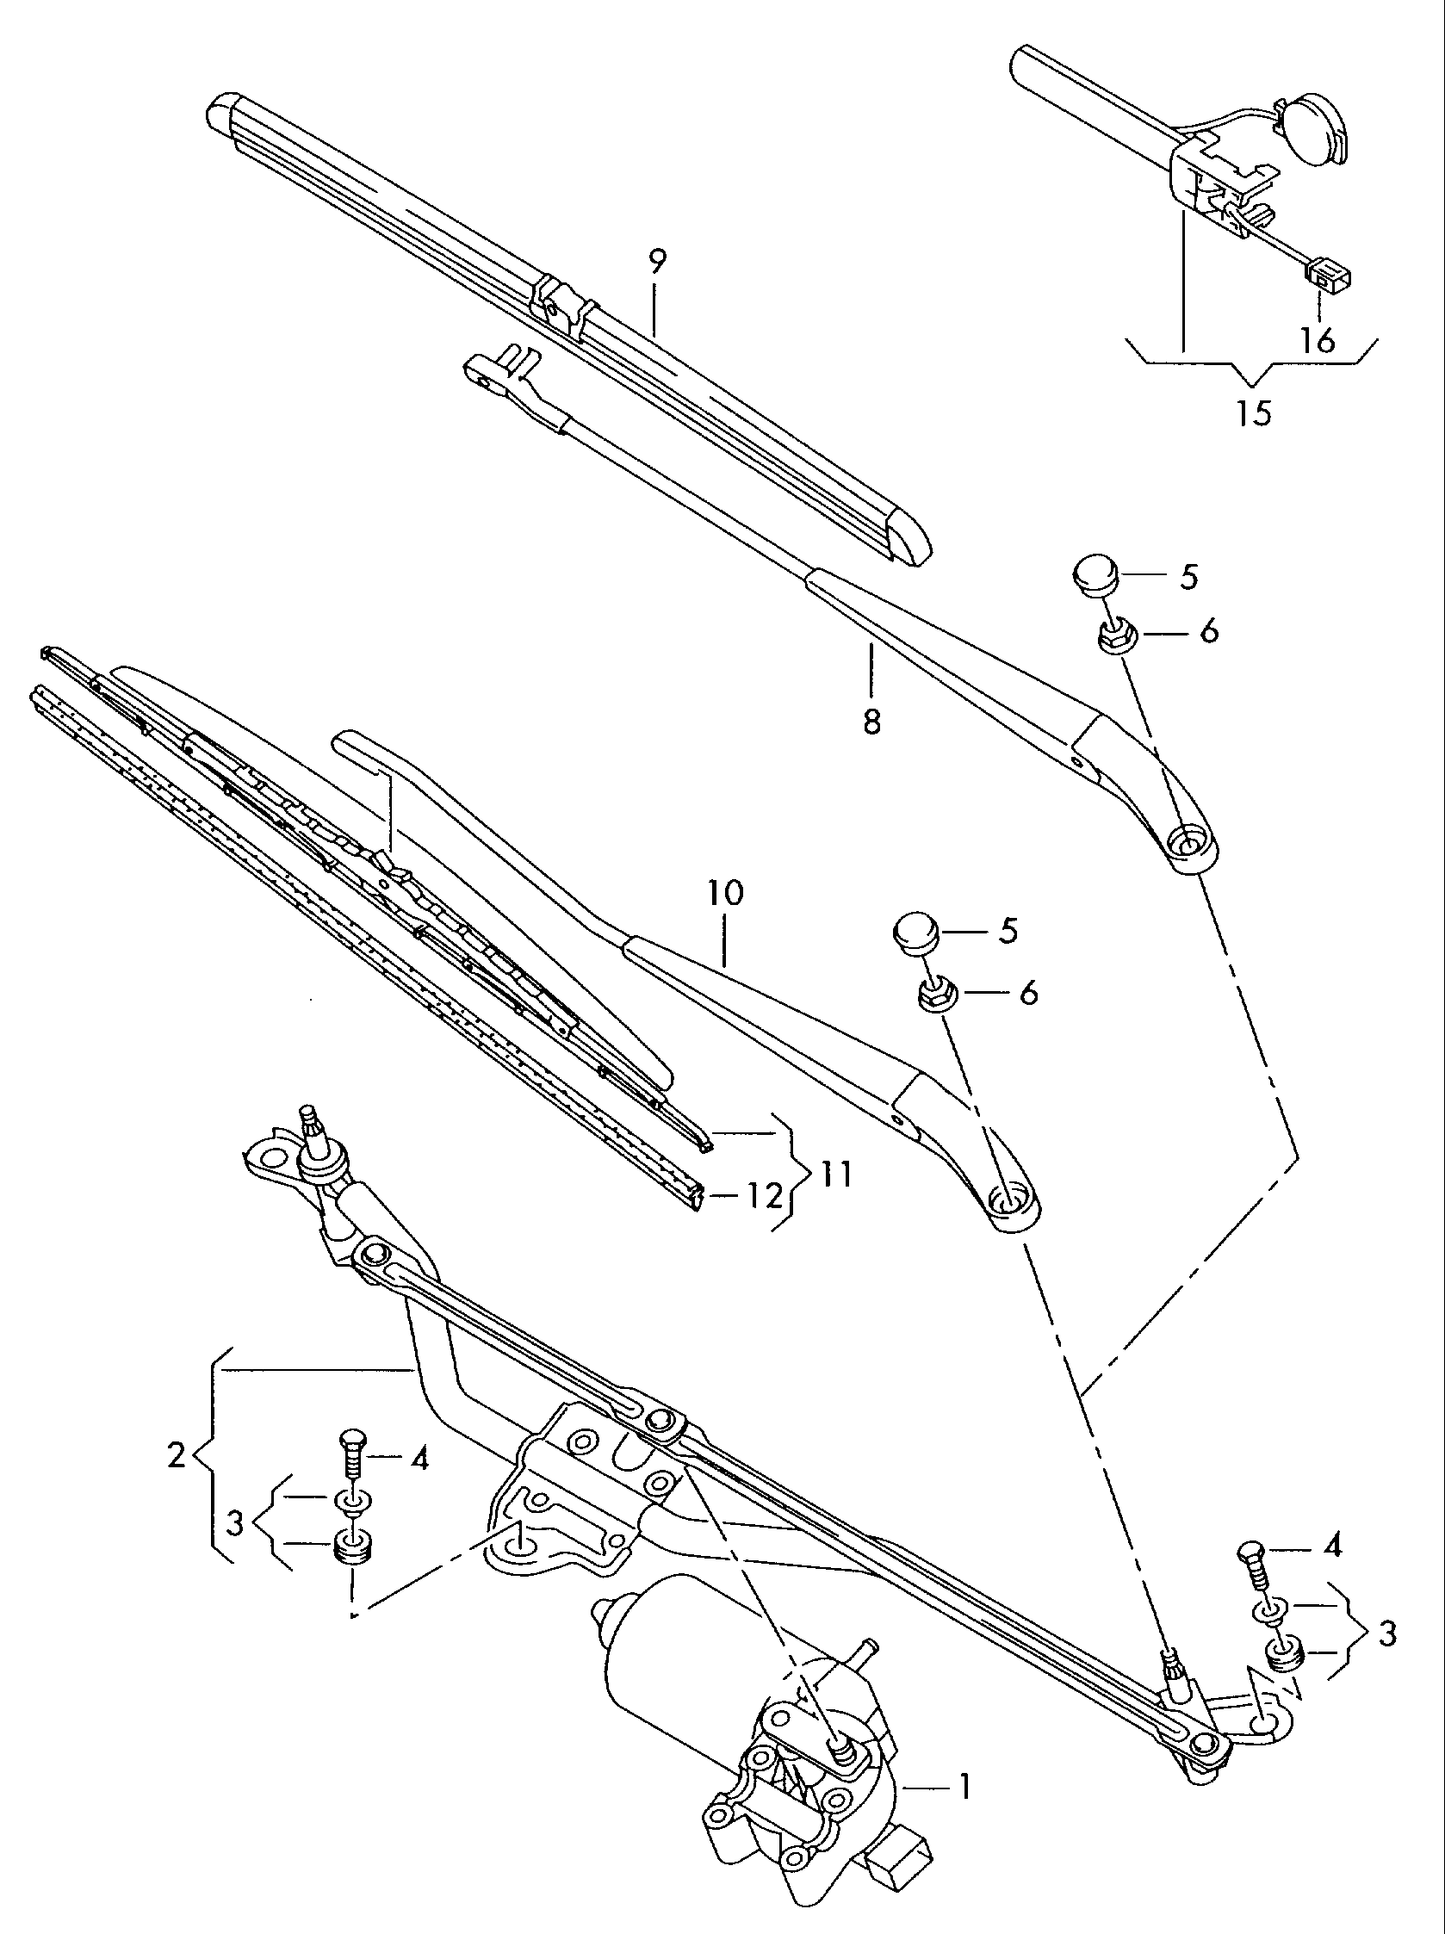 955-000 T5 Front windshield wiper ‘Please select parts from links below, prices will update’